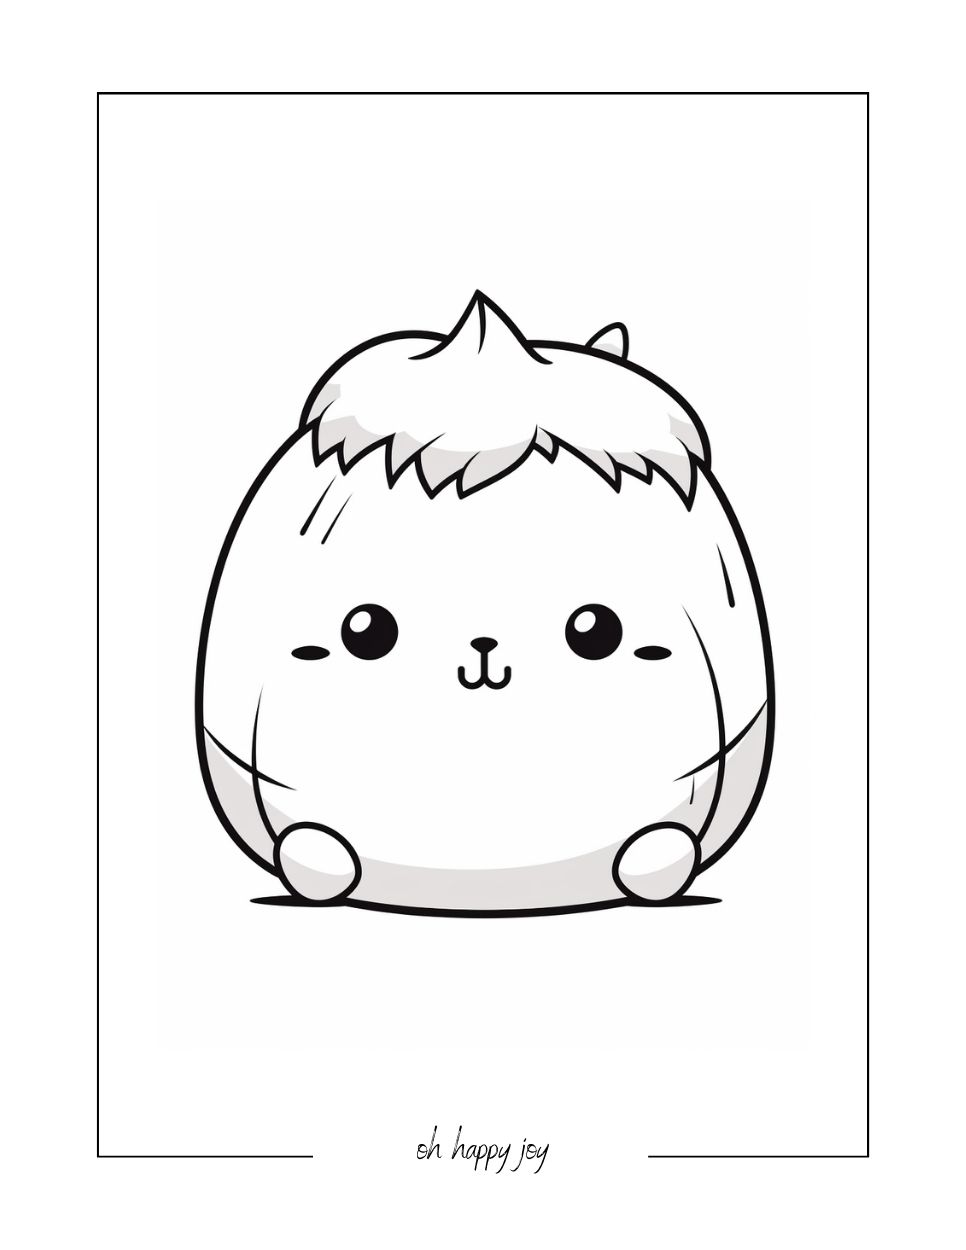 Short squishmallow coloring page